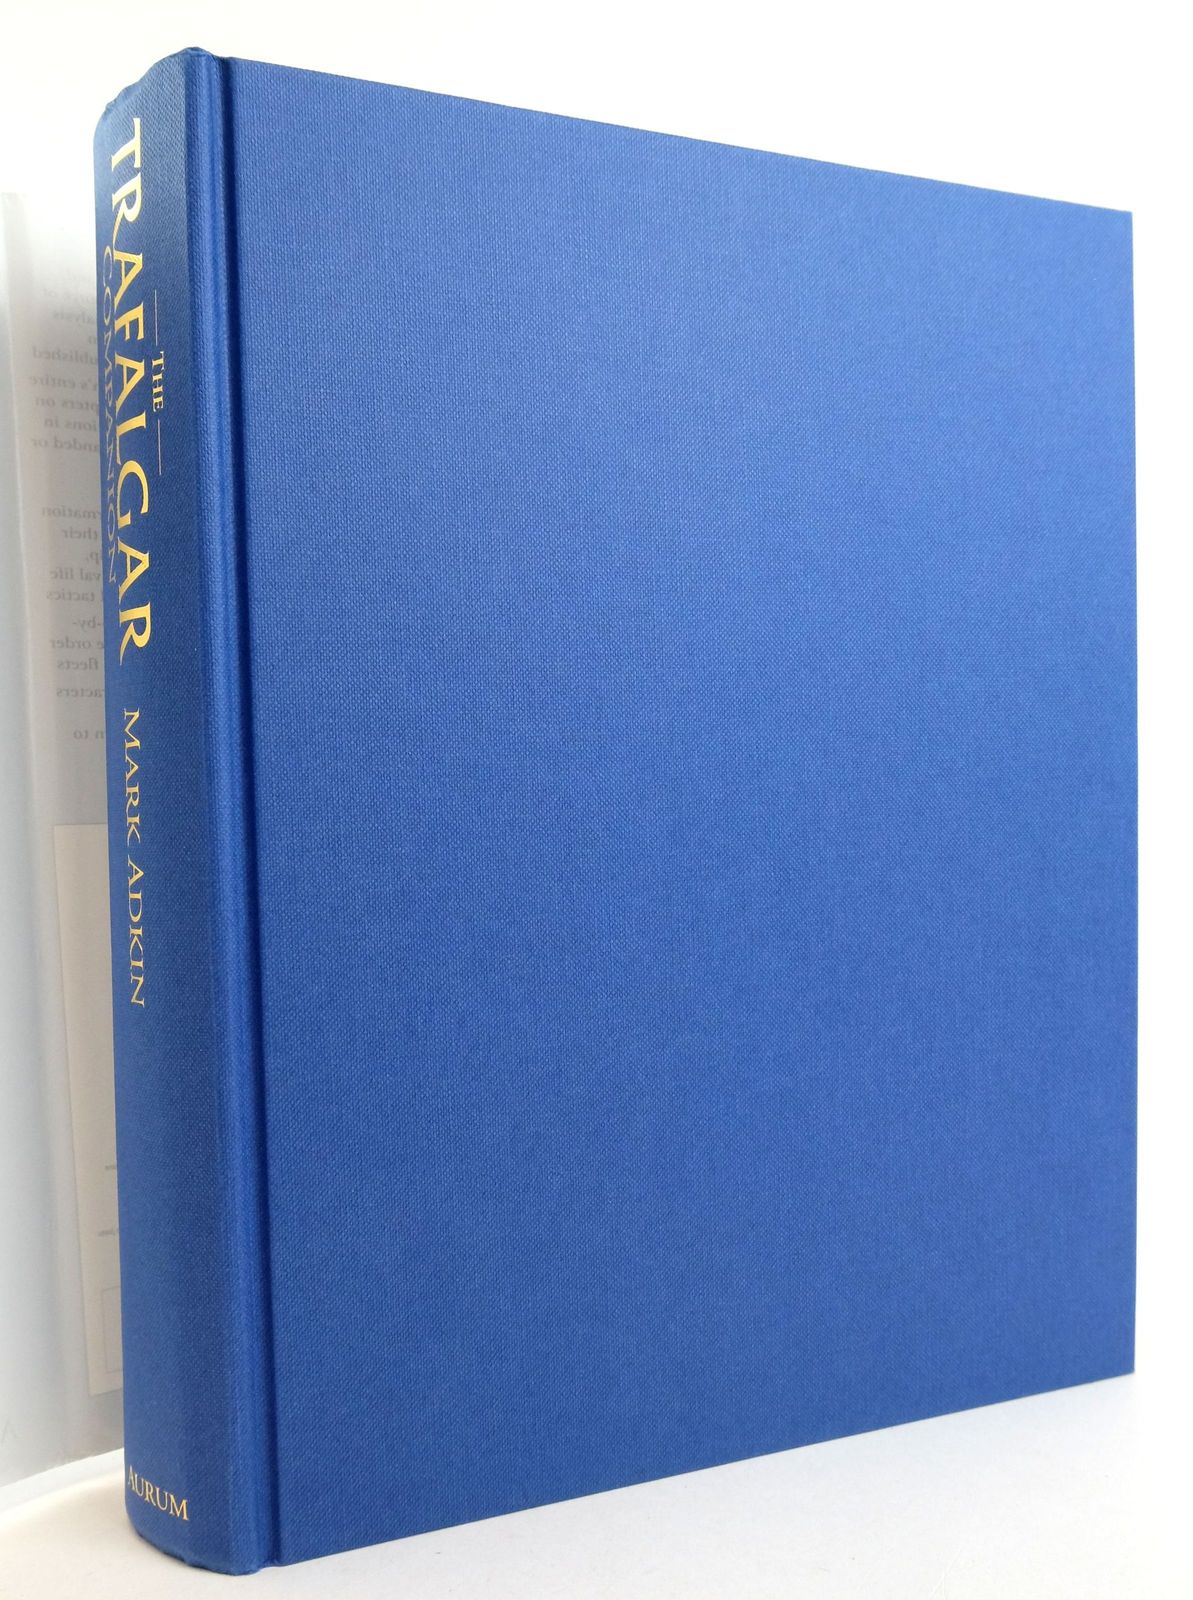 Photo of THE TRAFALGAR COMPANION written by Adkin, Mark illustrated by Farmer, Clive published by Aurum Press (STOCK CODE: 1819496)  for sale by Stella & Rose's Books